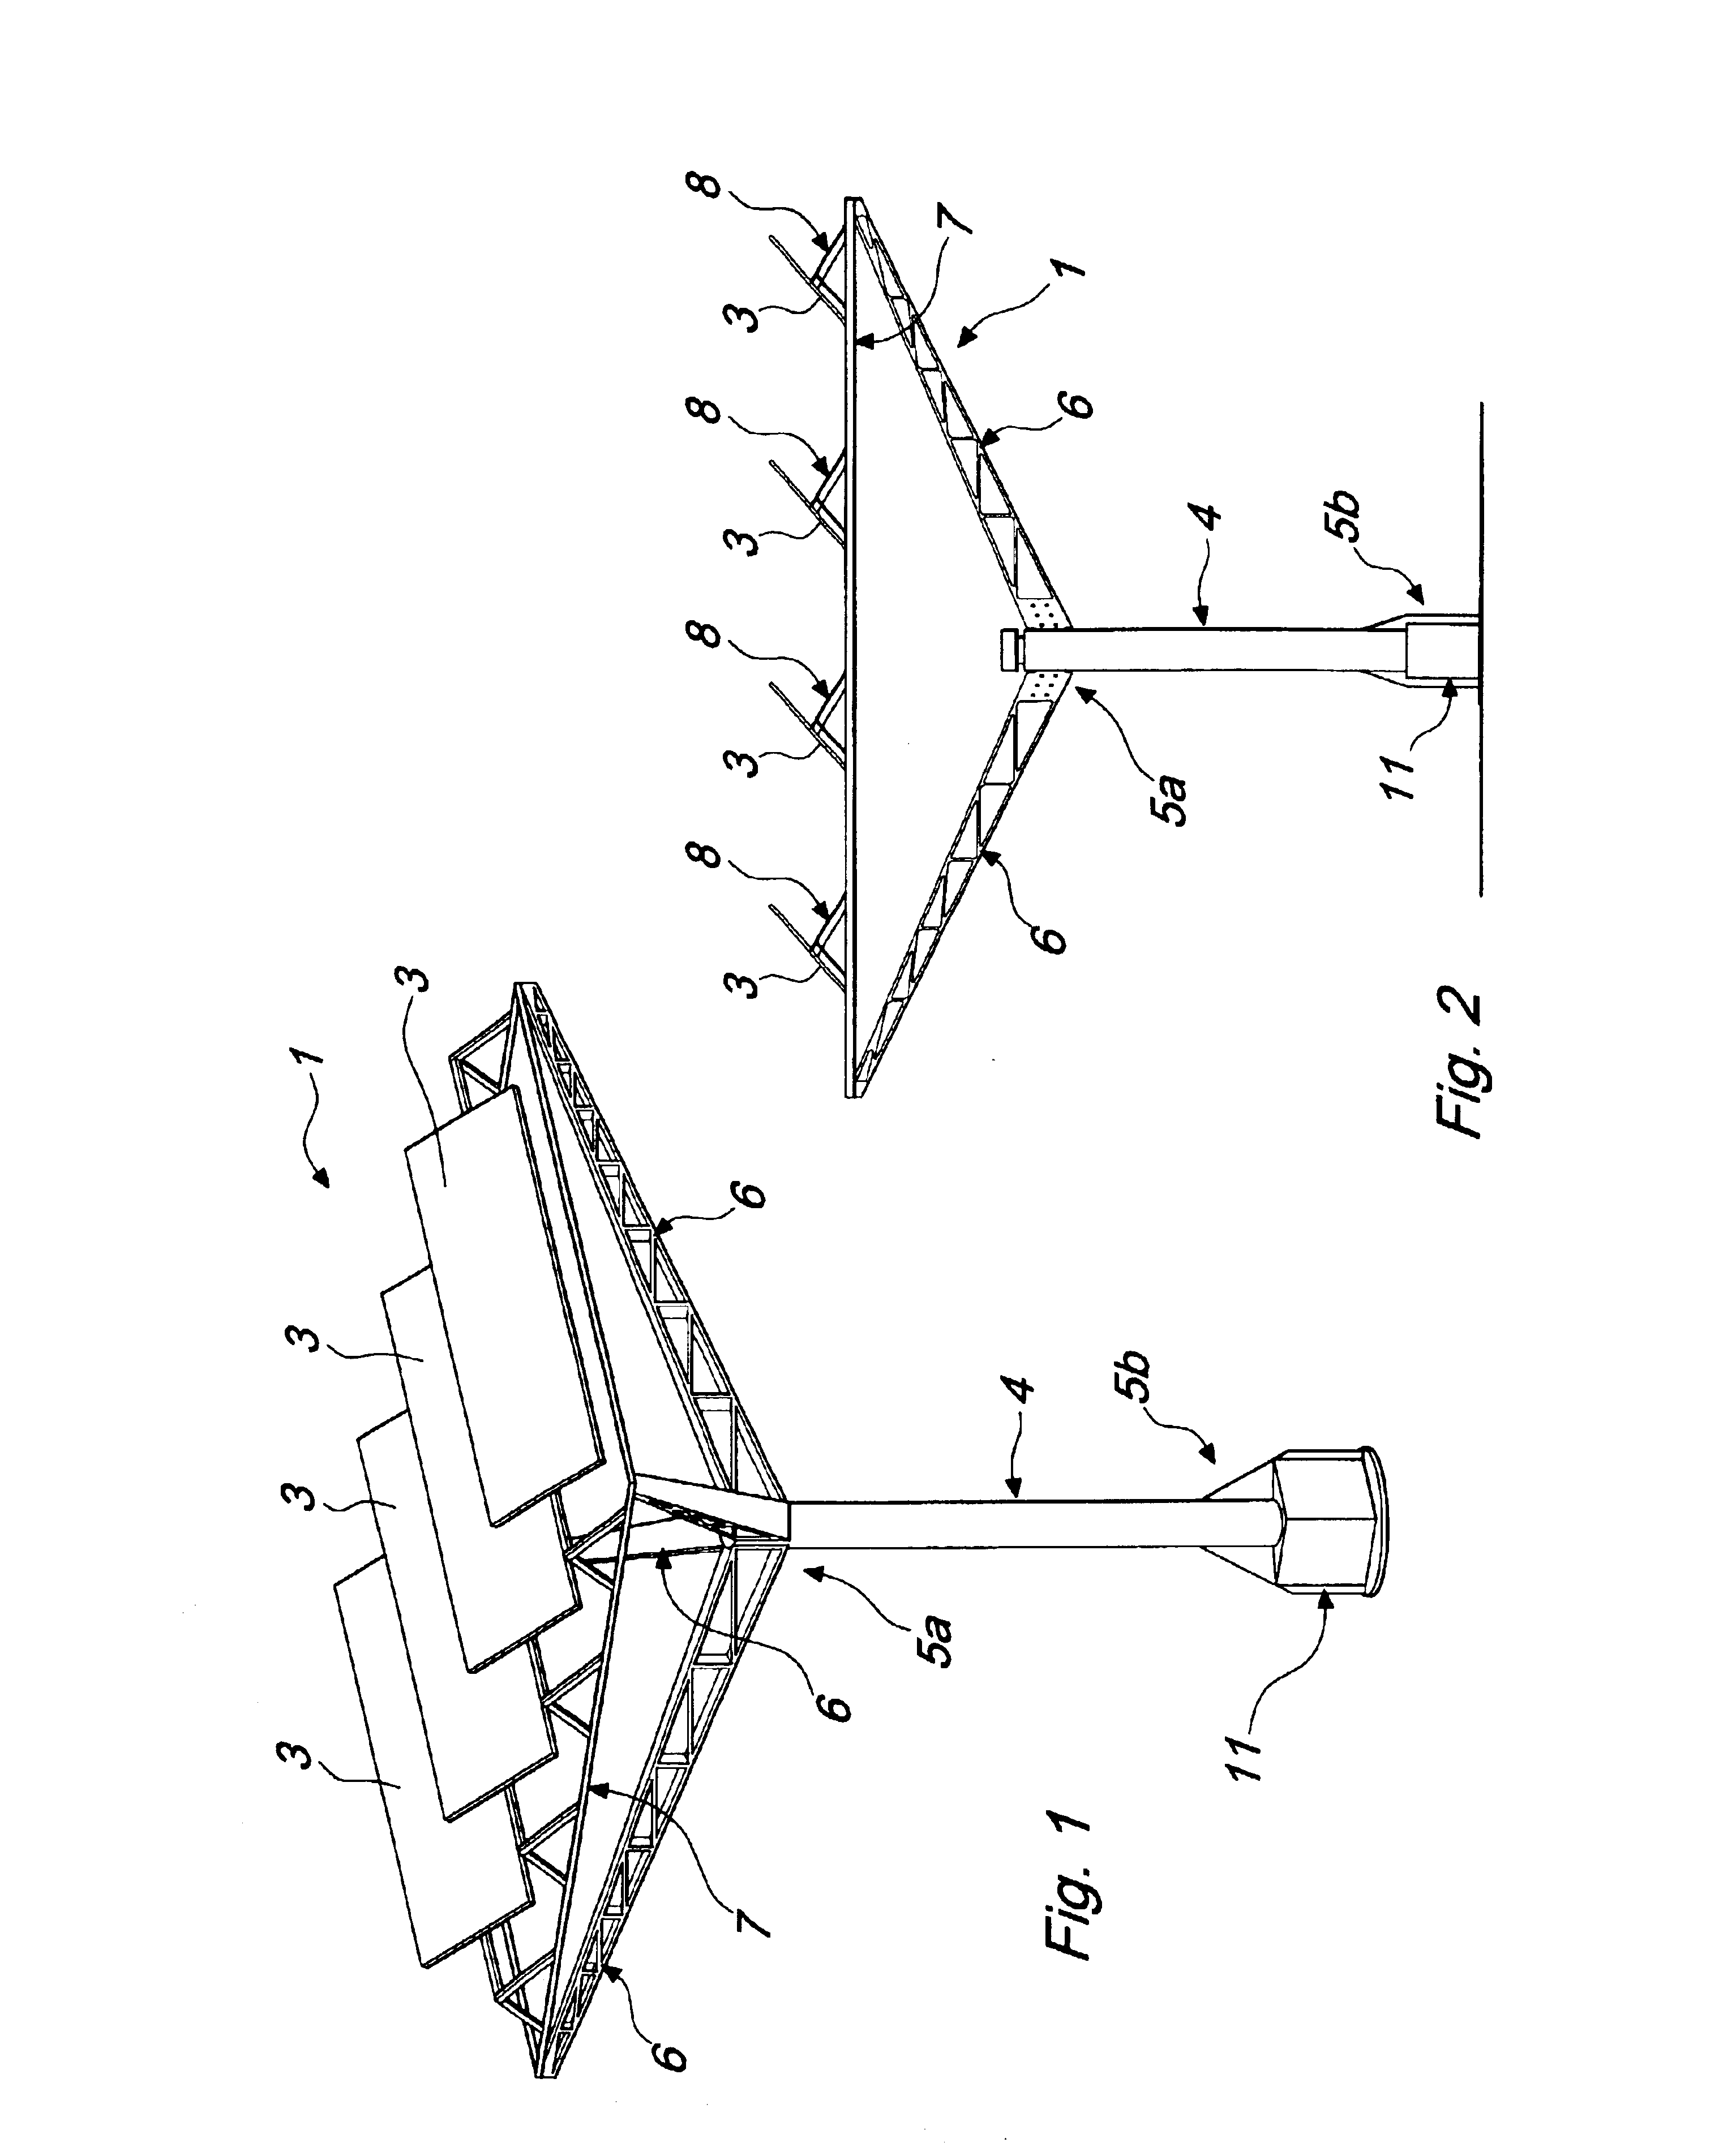 Device for converting solar radiation into electric power